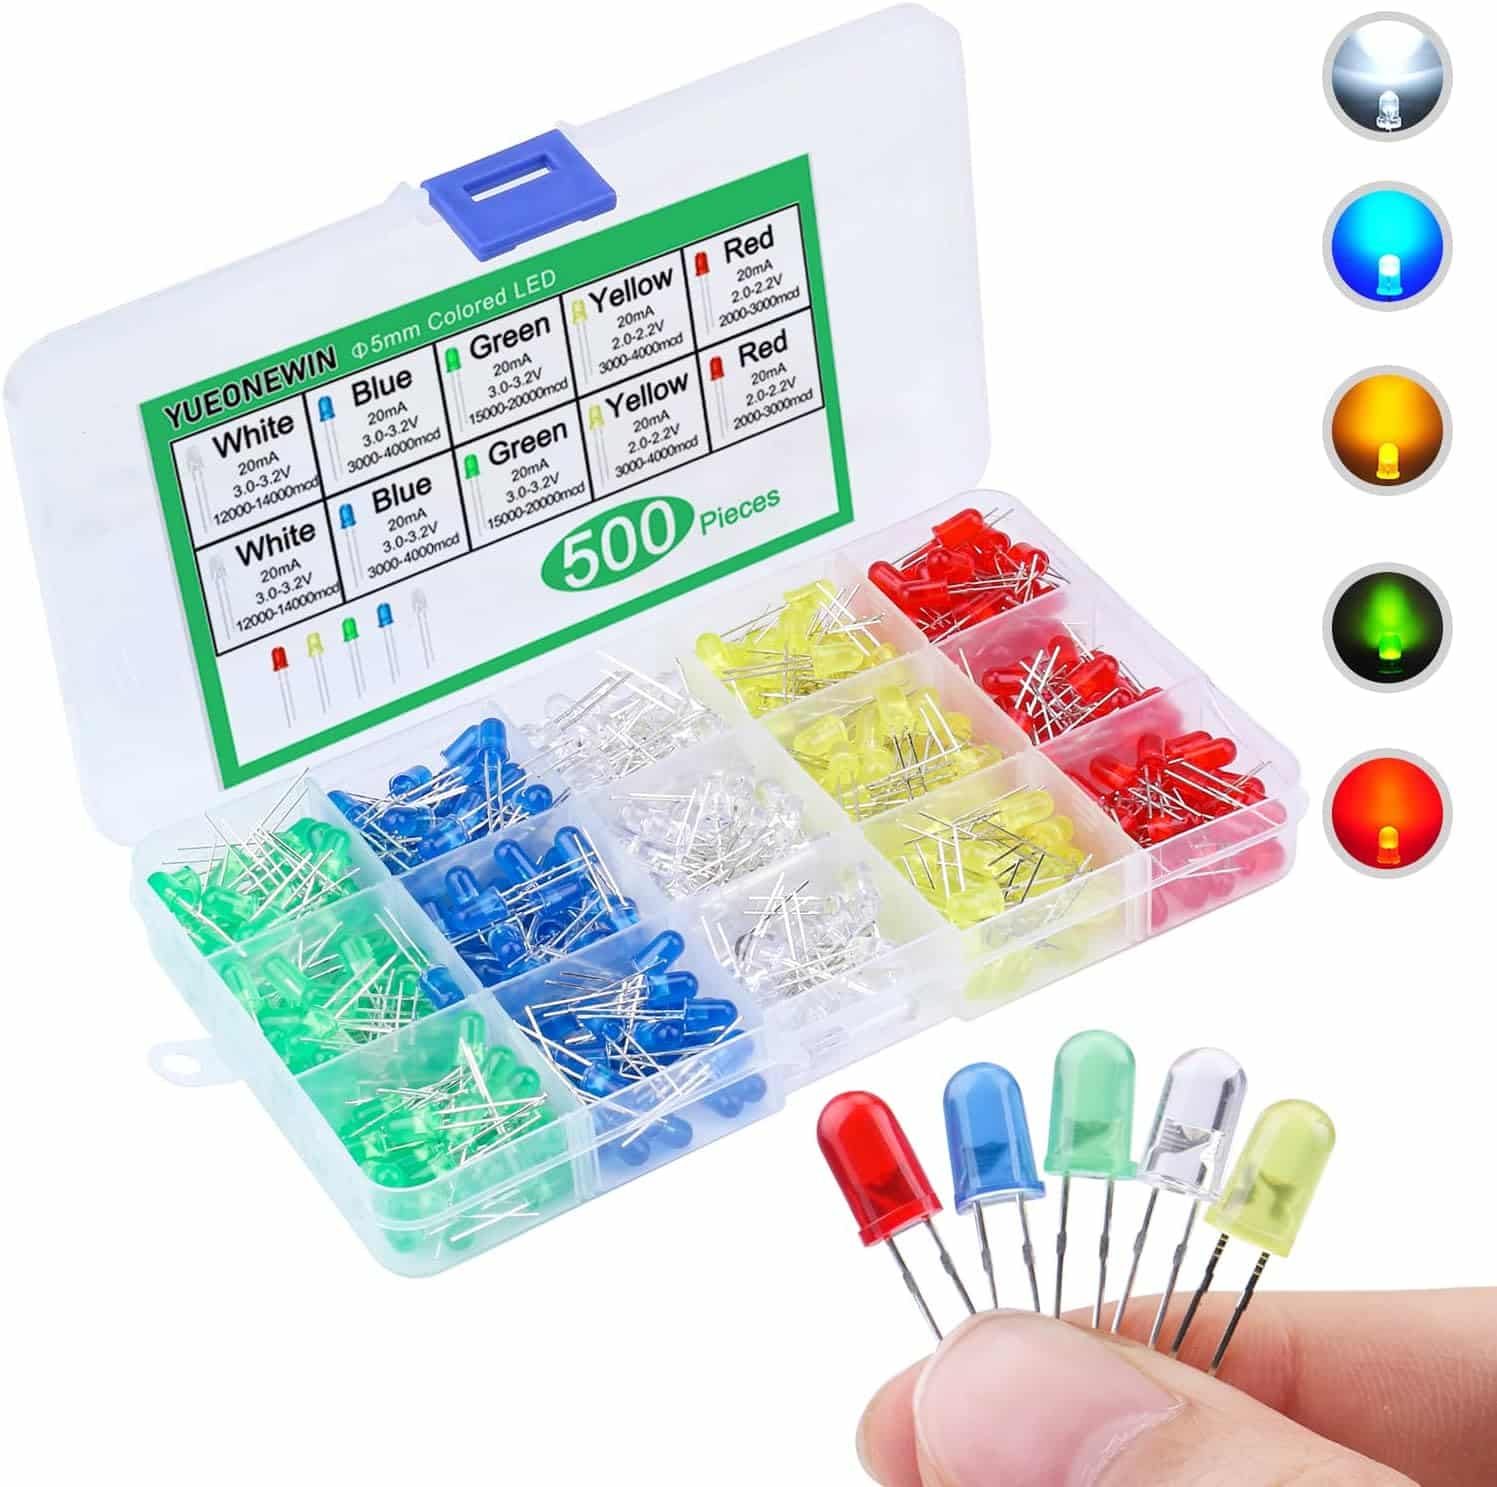 YUEONEWIN 500Pcs 5mm LED Diode Light Emitting Diode Assortment Kit Led Electronics Circuit Assorted Kit for Arduino, PCB Circuit DIY, Christmas Card Making (Multicolor-White/Red/Yellow/Blue/Green)